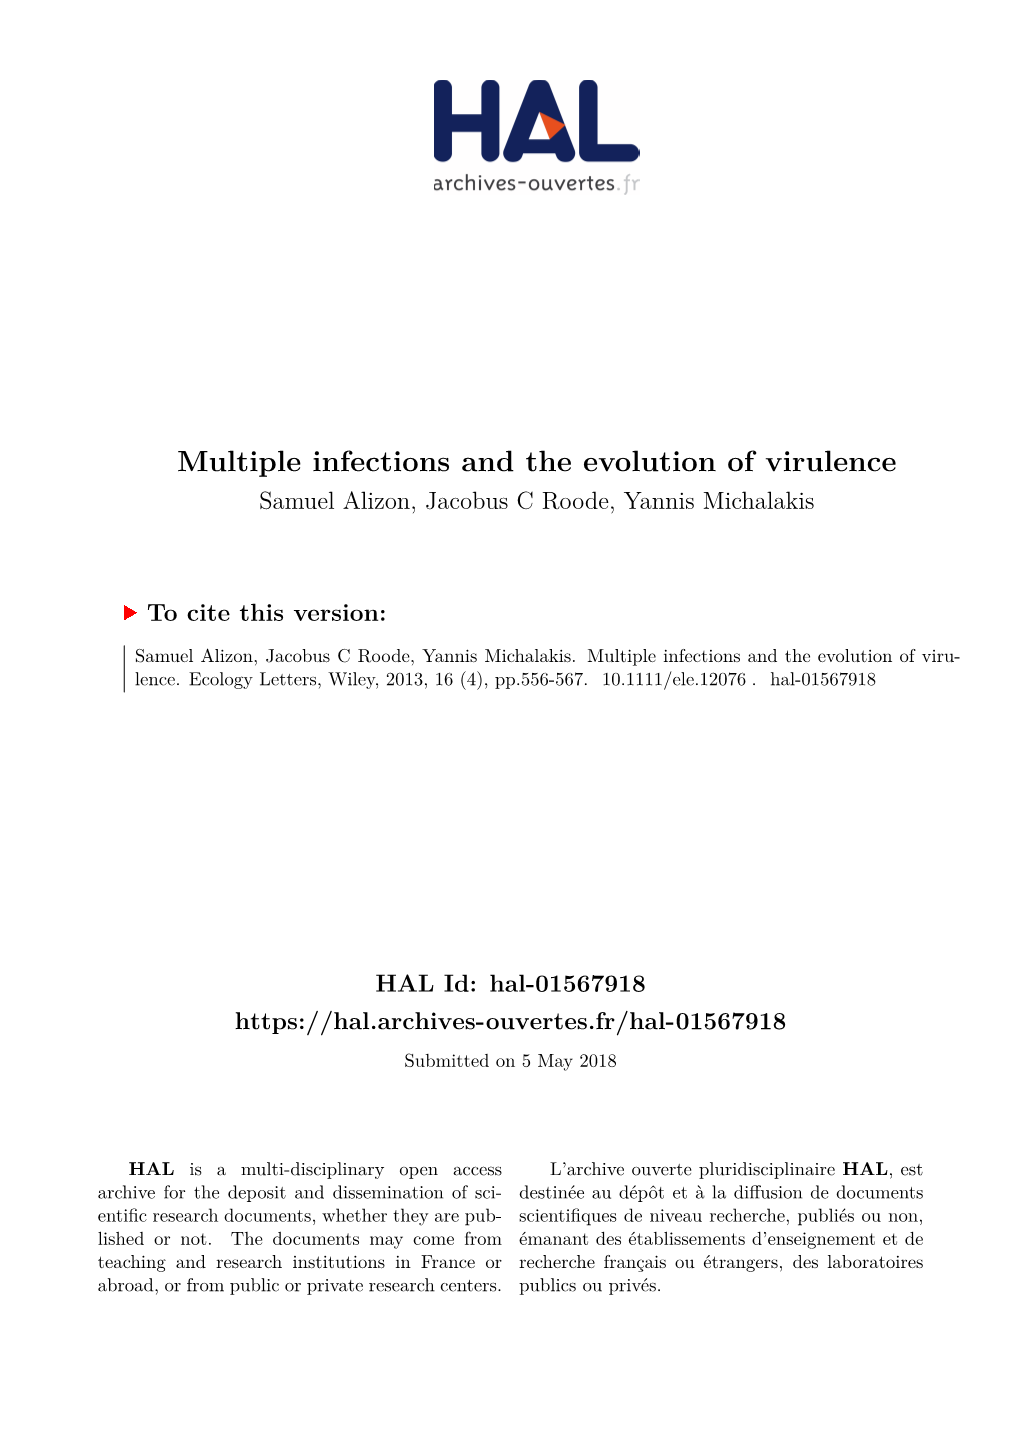 Multiple Infections and the Evolution of Virulence Samuel Alizon, Jacobus C Roode, Yannis Michalakis